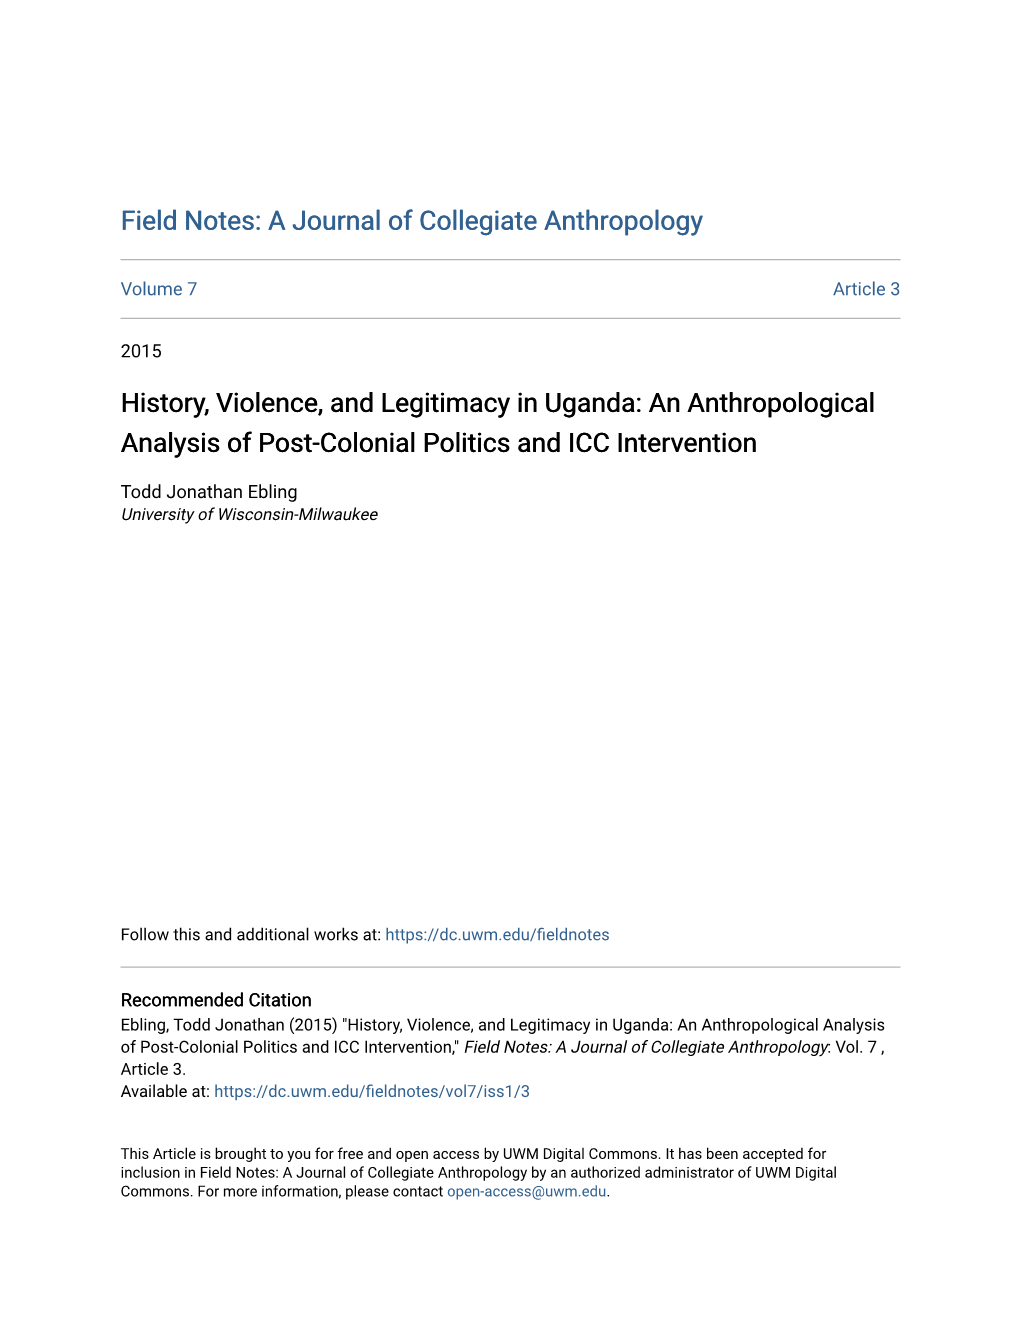 History, Violence, and Legitimacy in Uganda: an Anthropological Analysis of Post-Colonial Politics and ICC Intervention